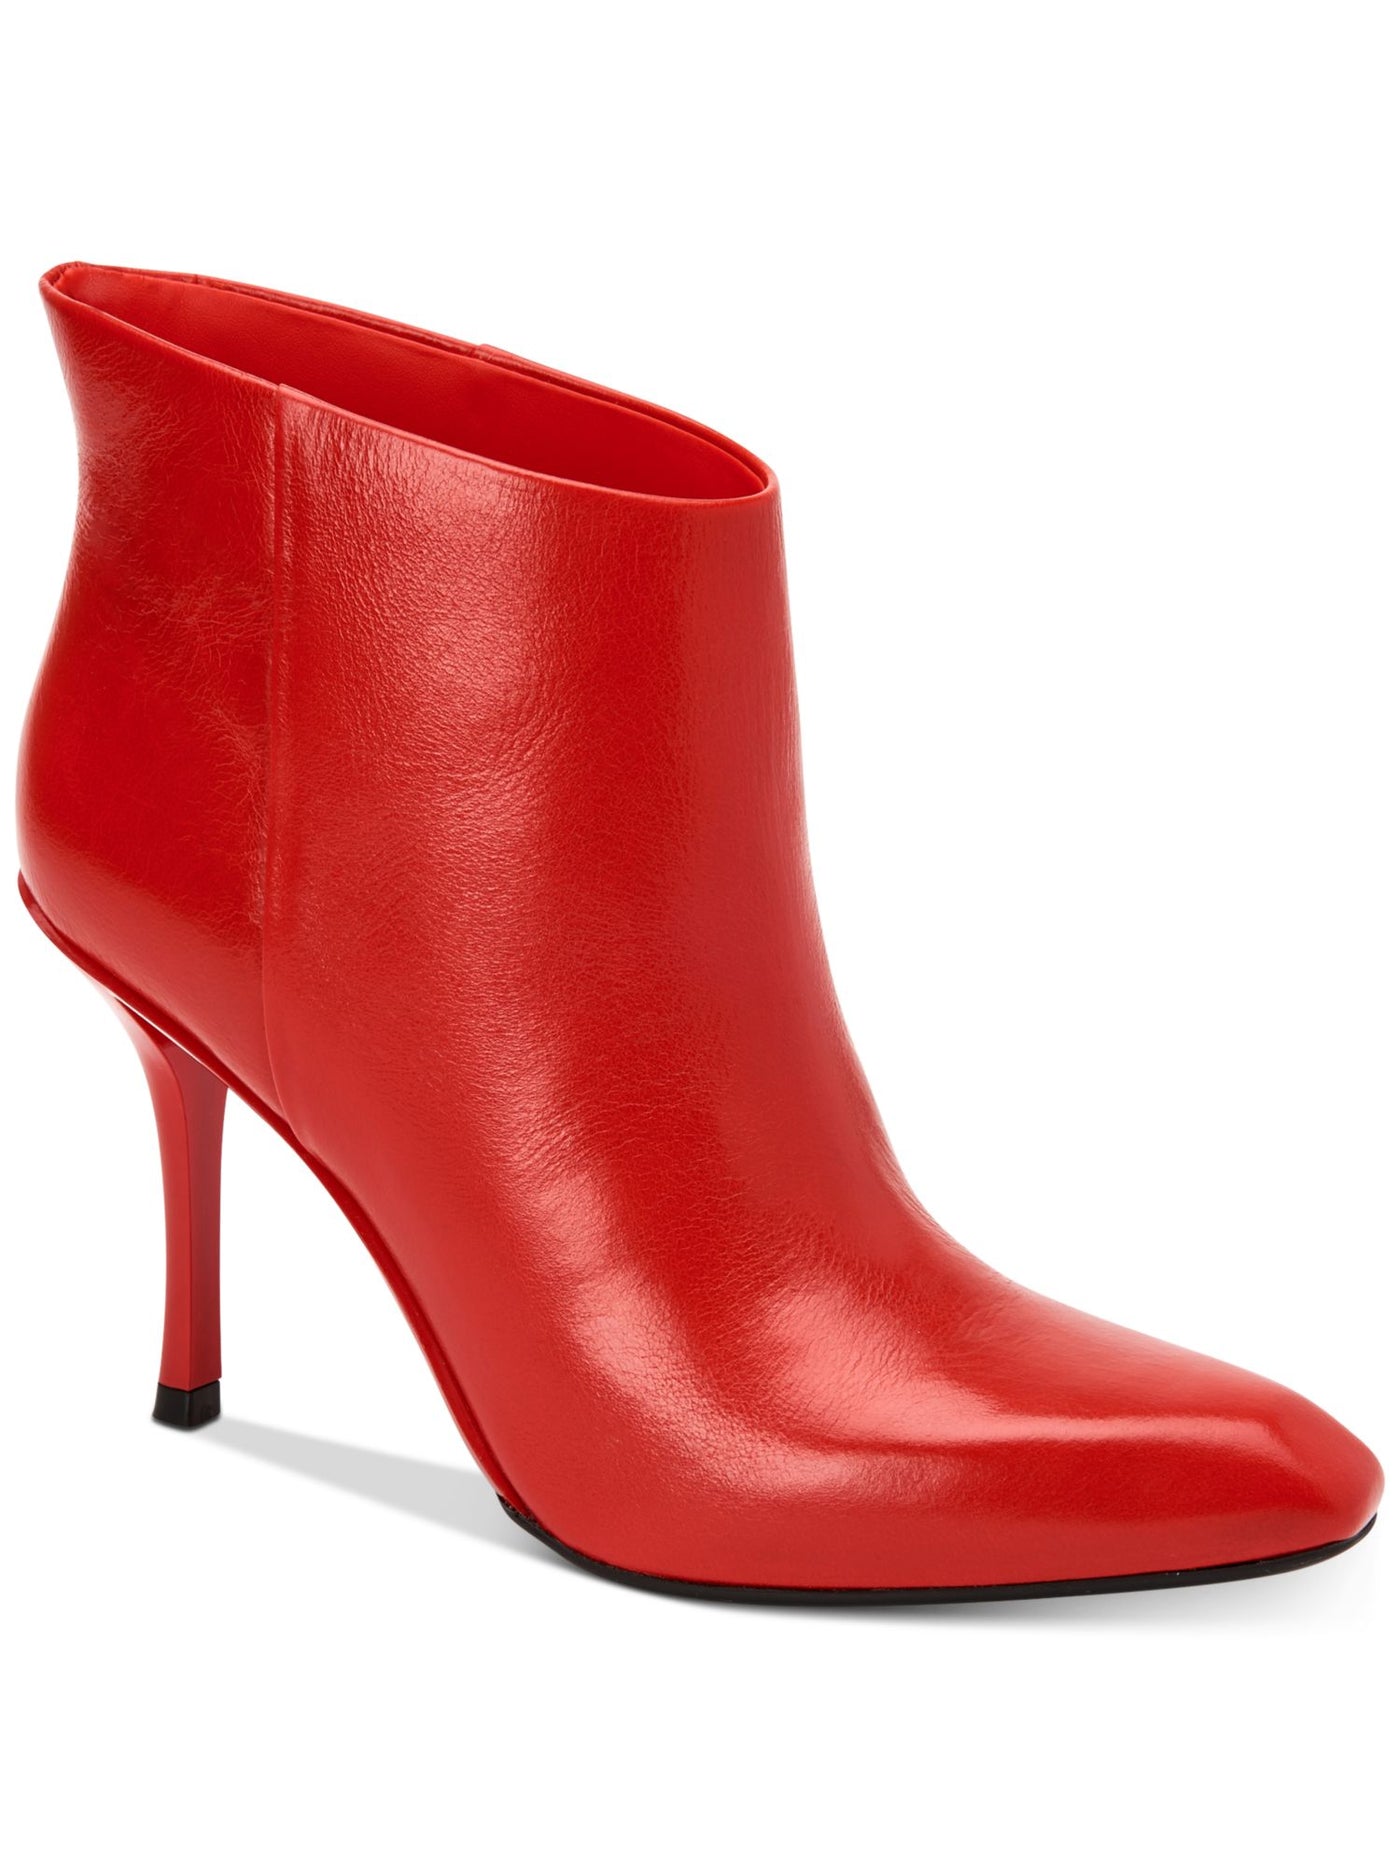 CALVIN KLEIN Womens Red Cushioned Slip Resistant Mim Square Toe Sculpted Heel Leather Booties 6.5 M